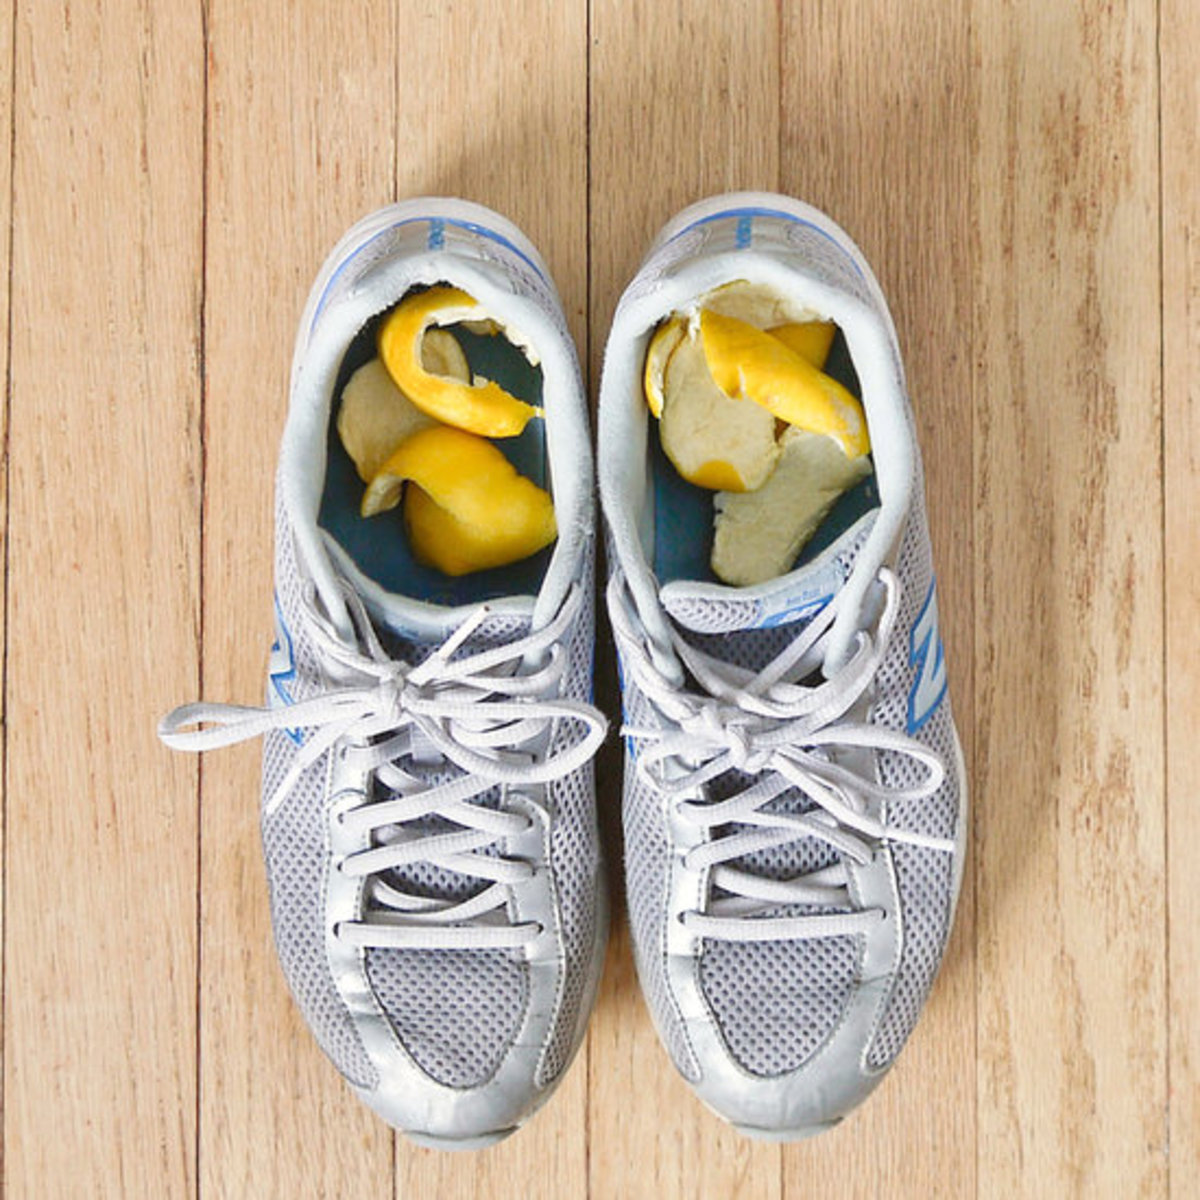 Put orange peels in smelly shoes to refresh them.